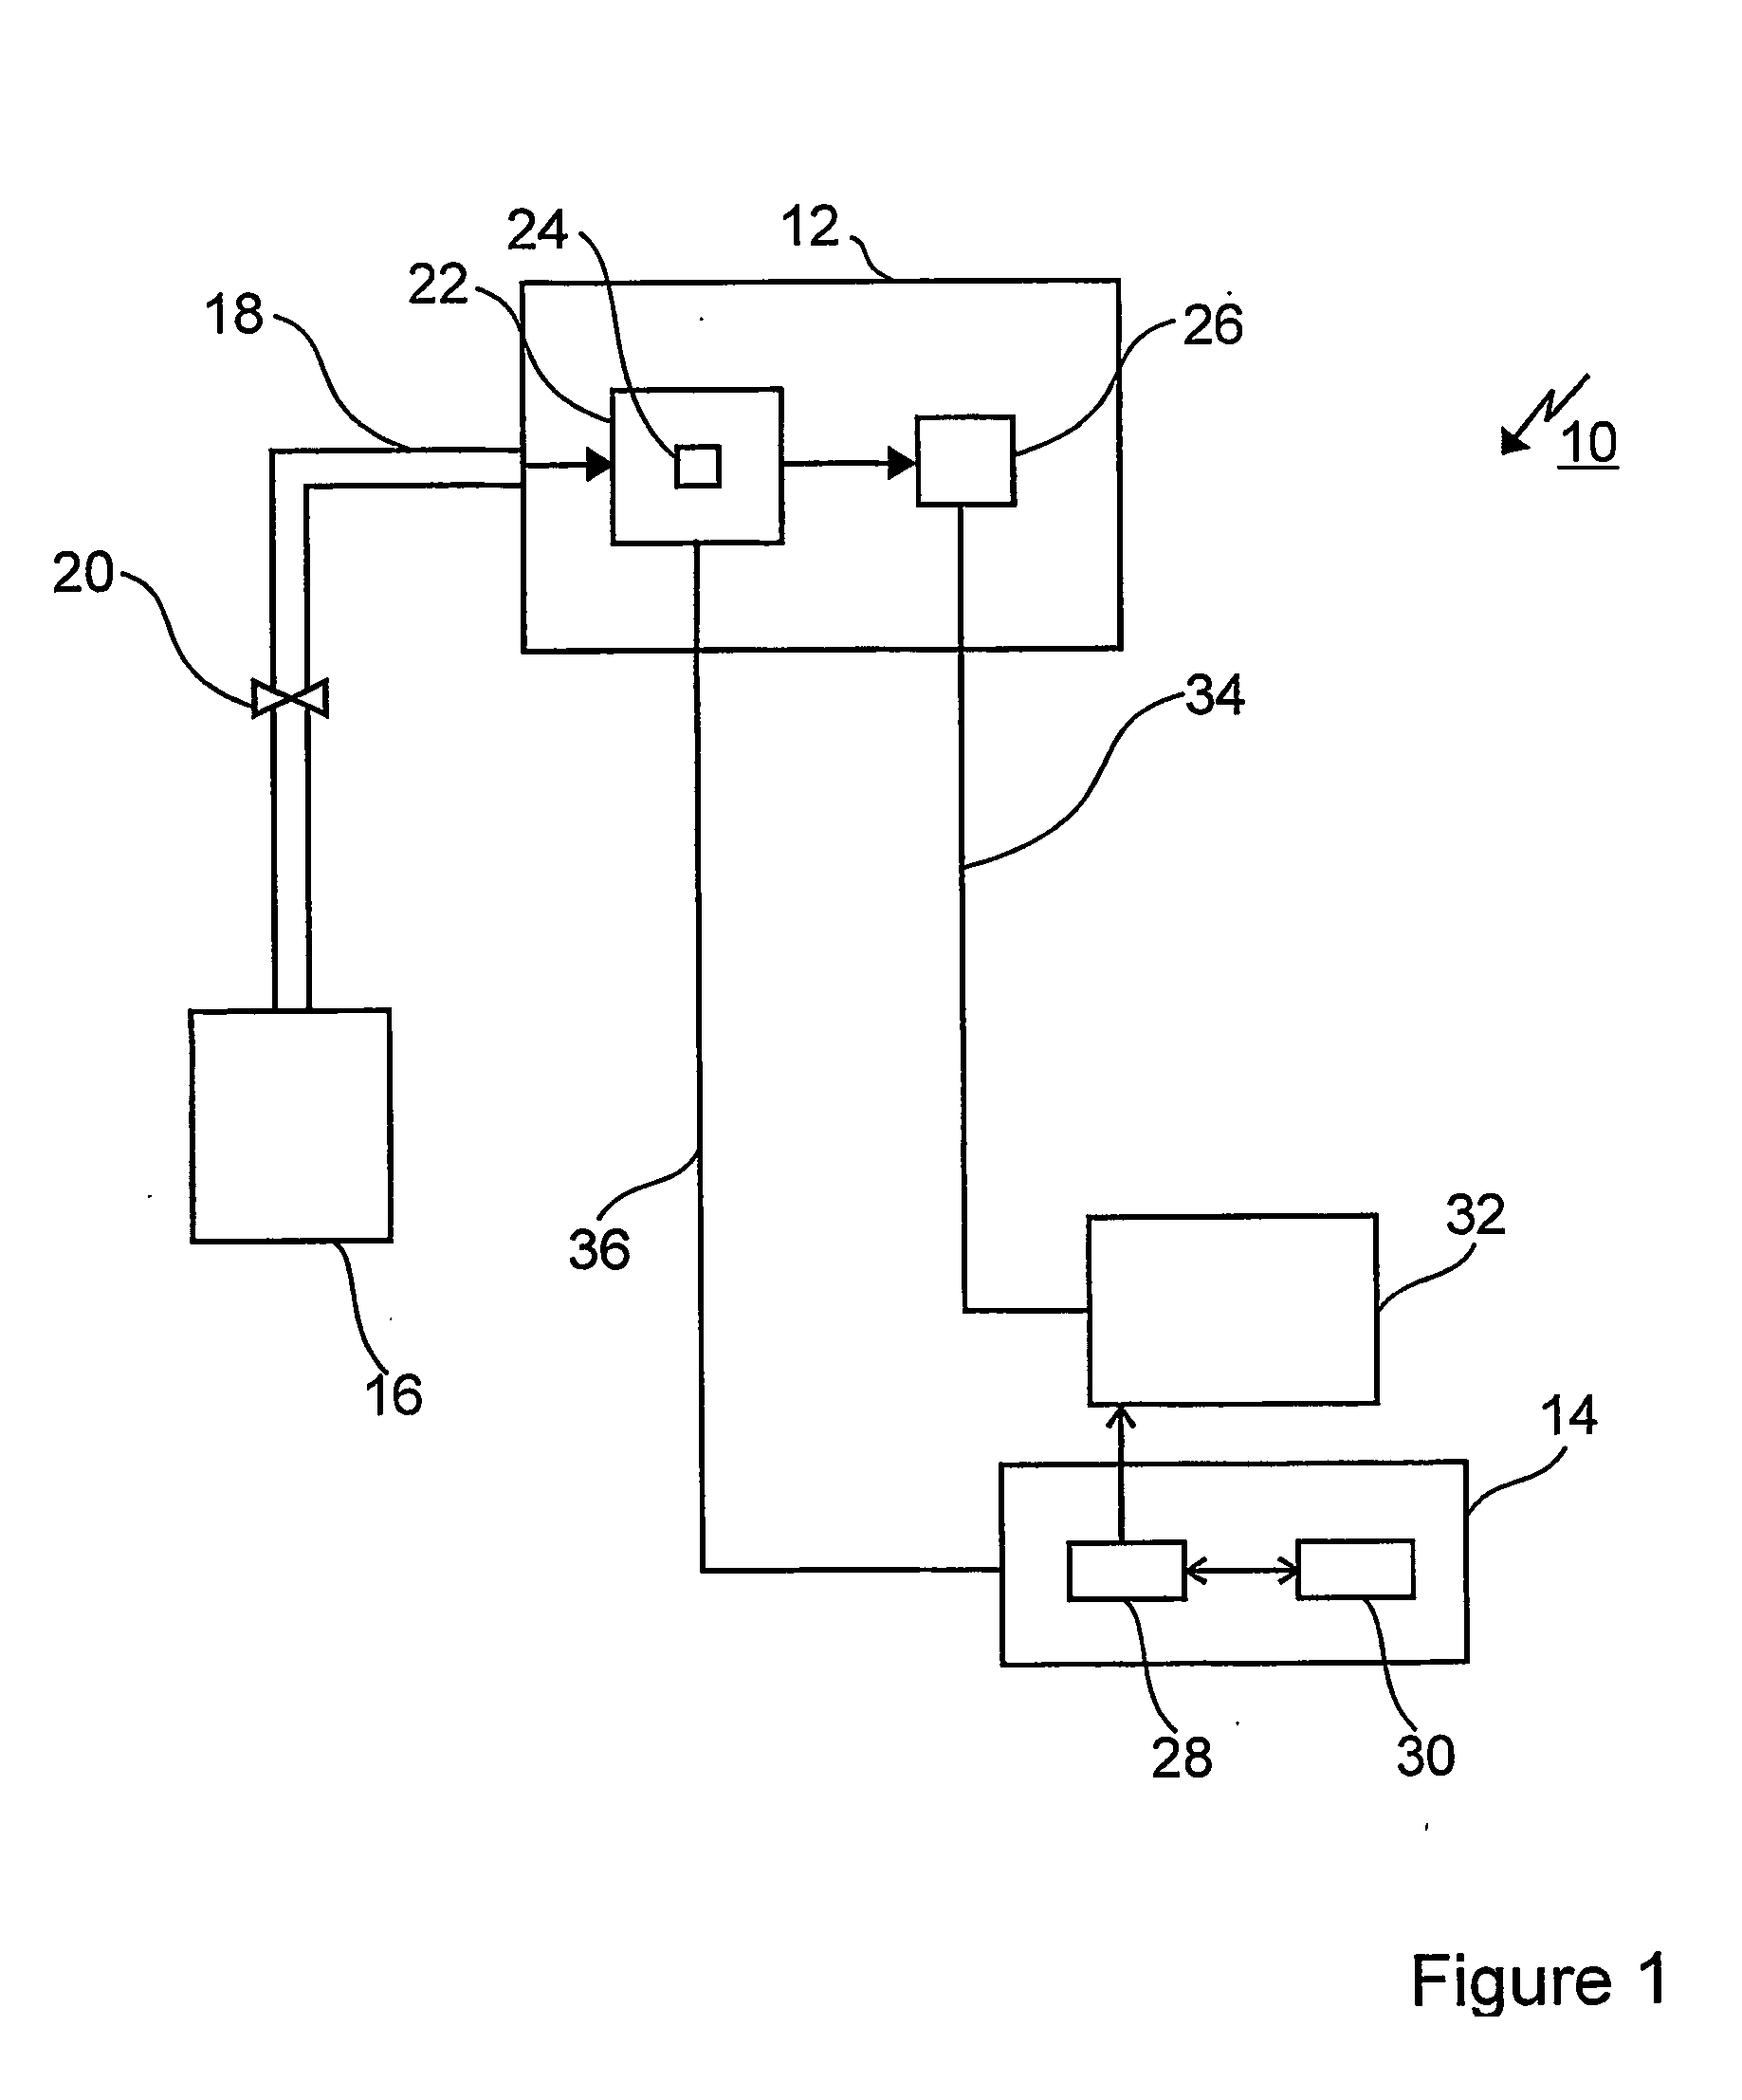 Faims apparatus and method for detecting trace amounts of a vapour in a carrier gas